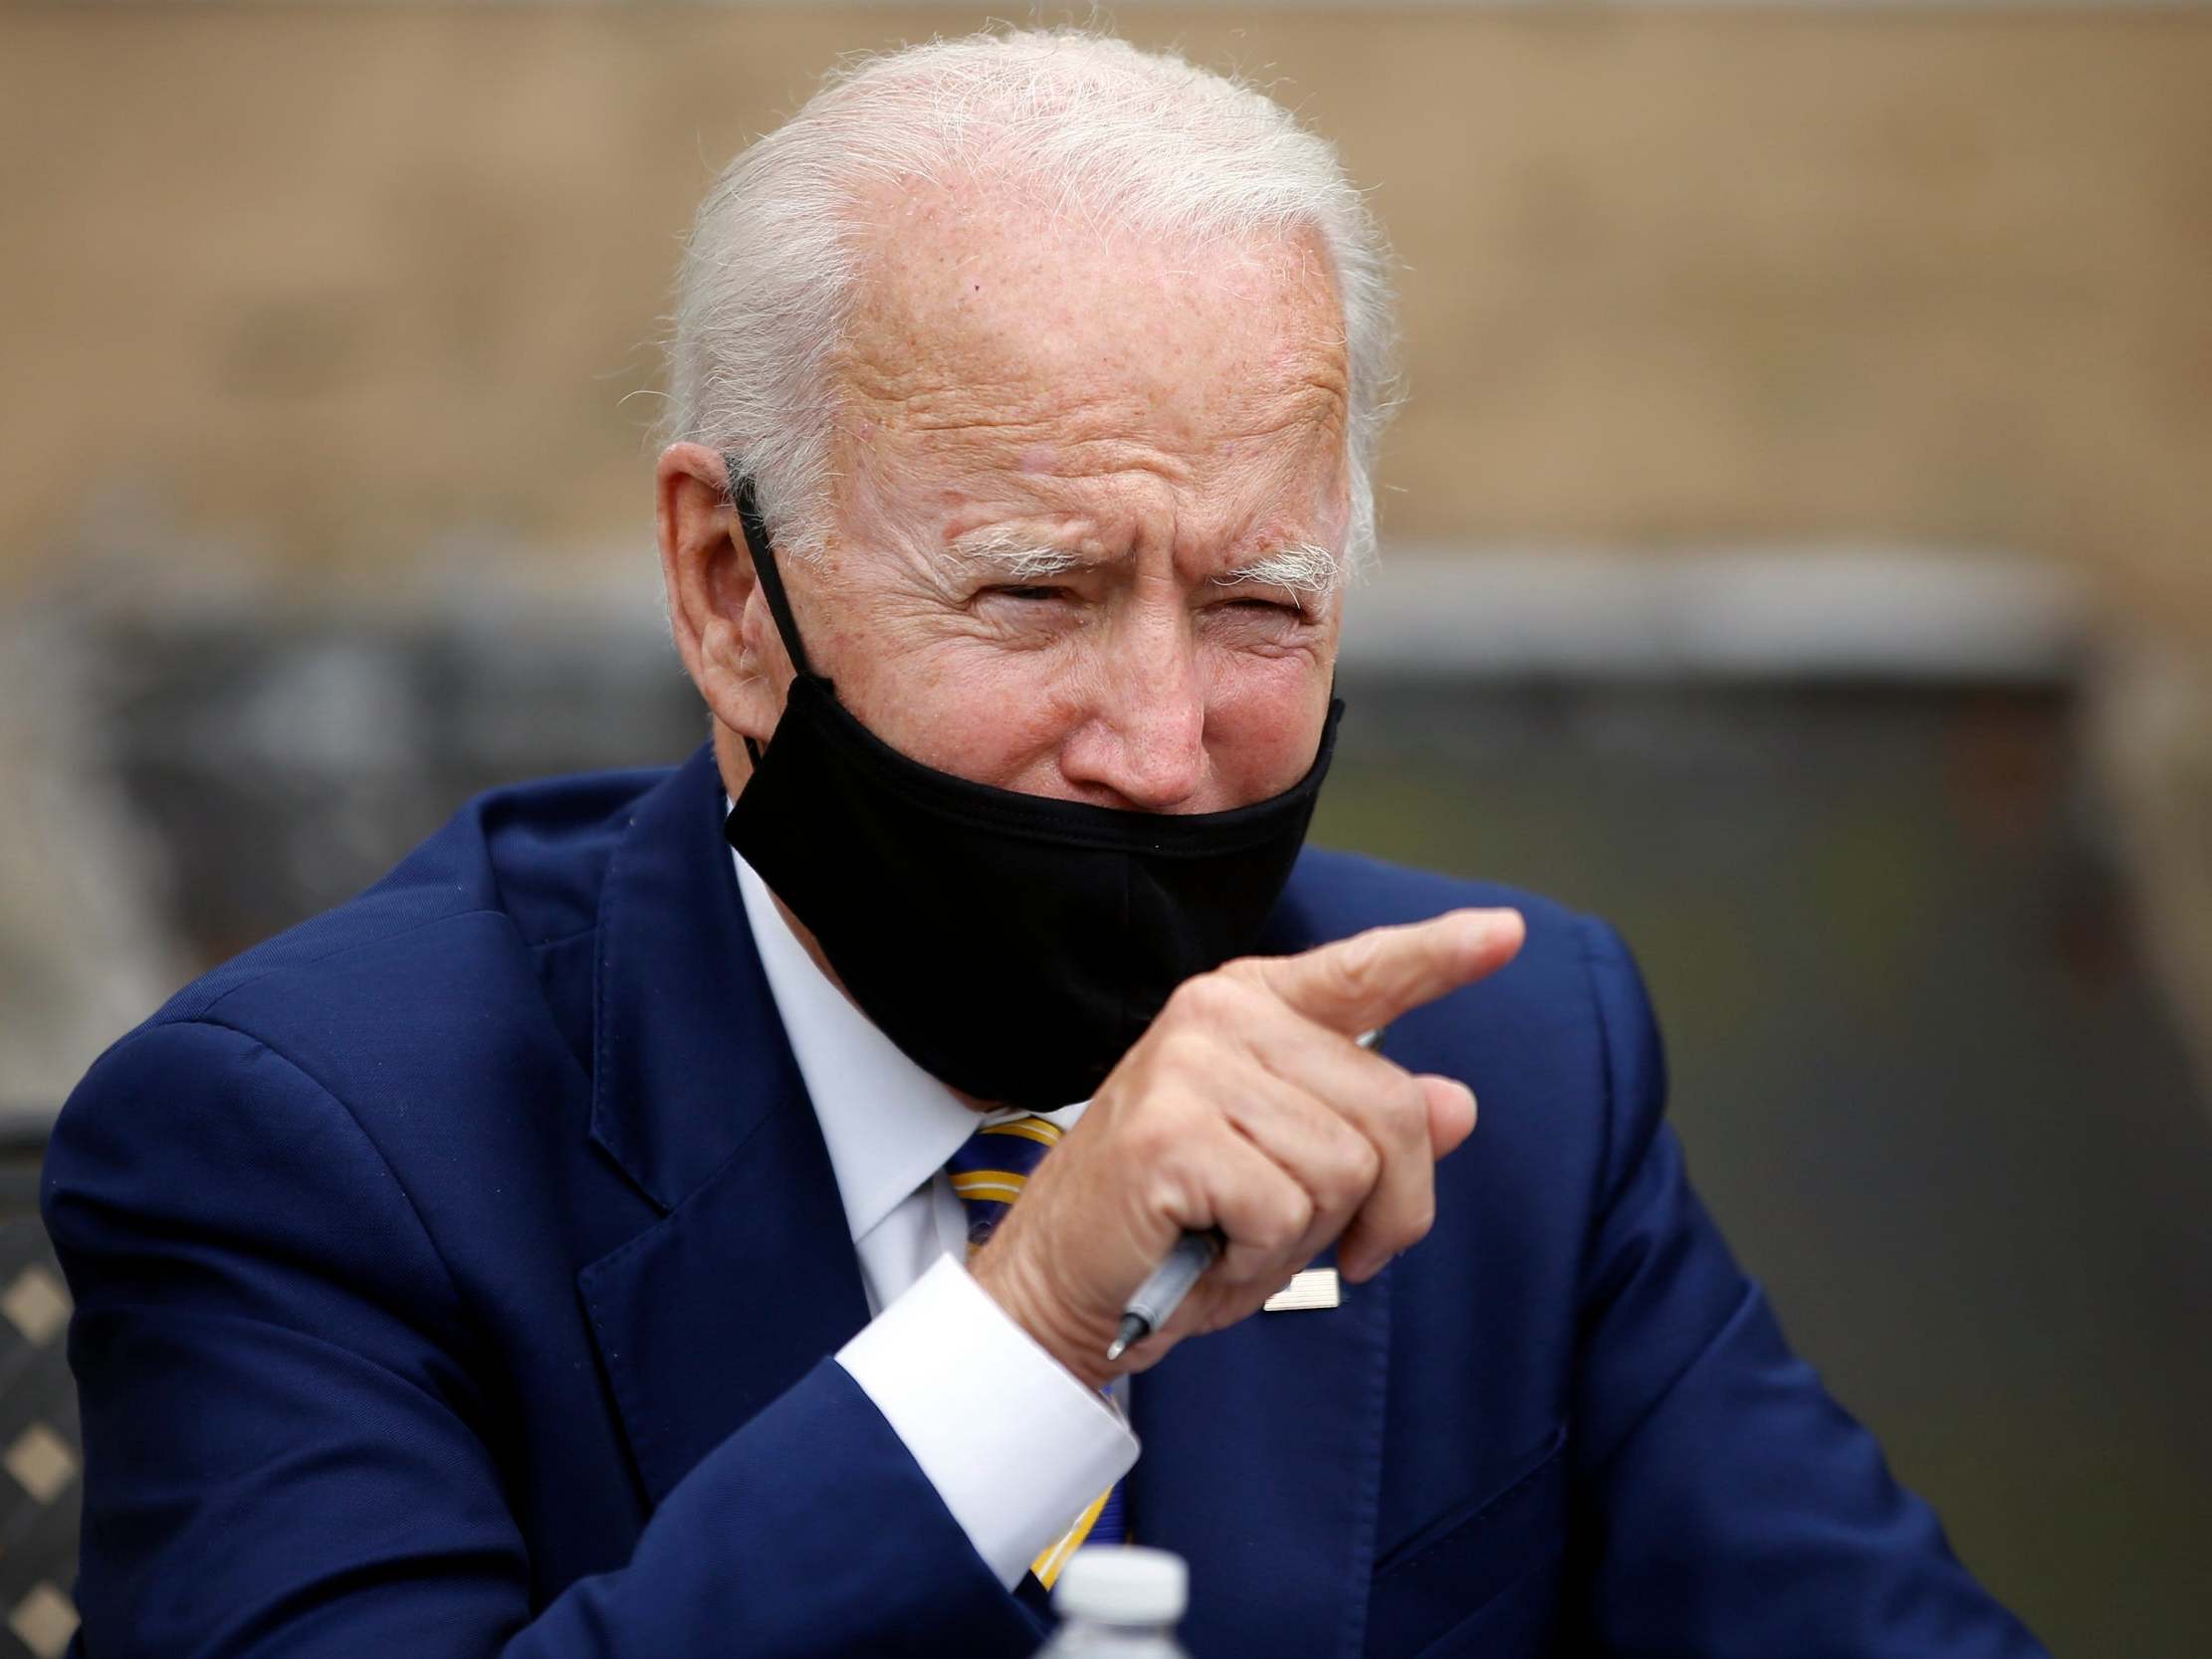 Biden says wearing masks for at least the next three months is key to safe school reopening